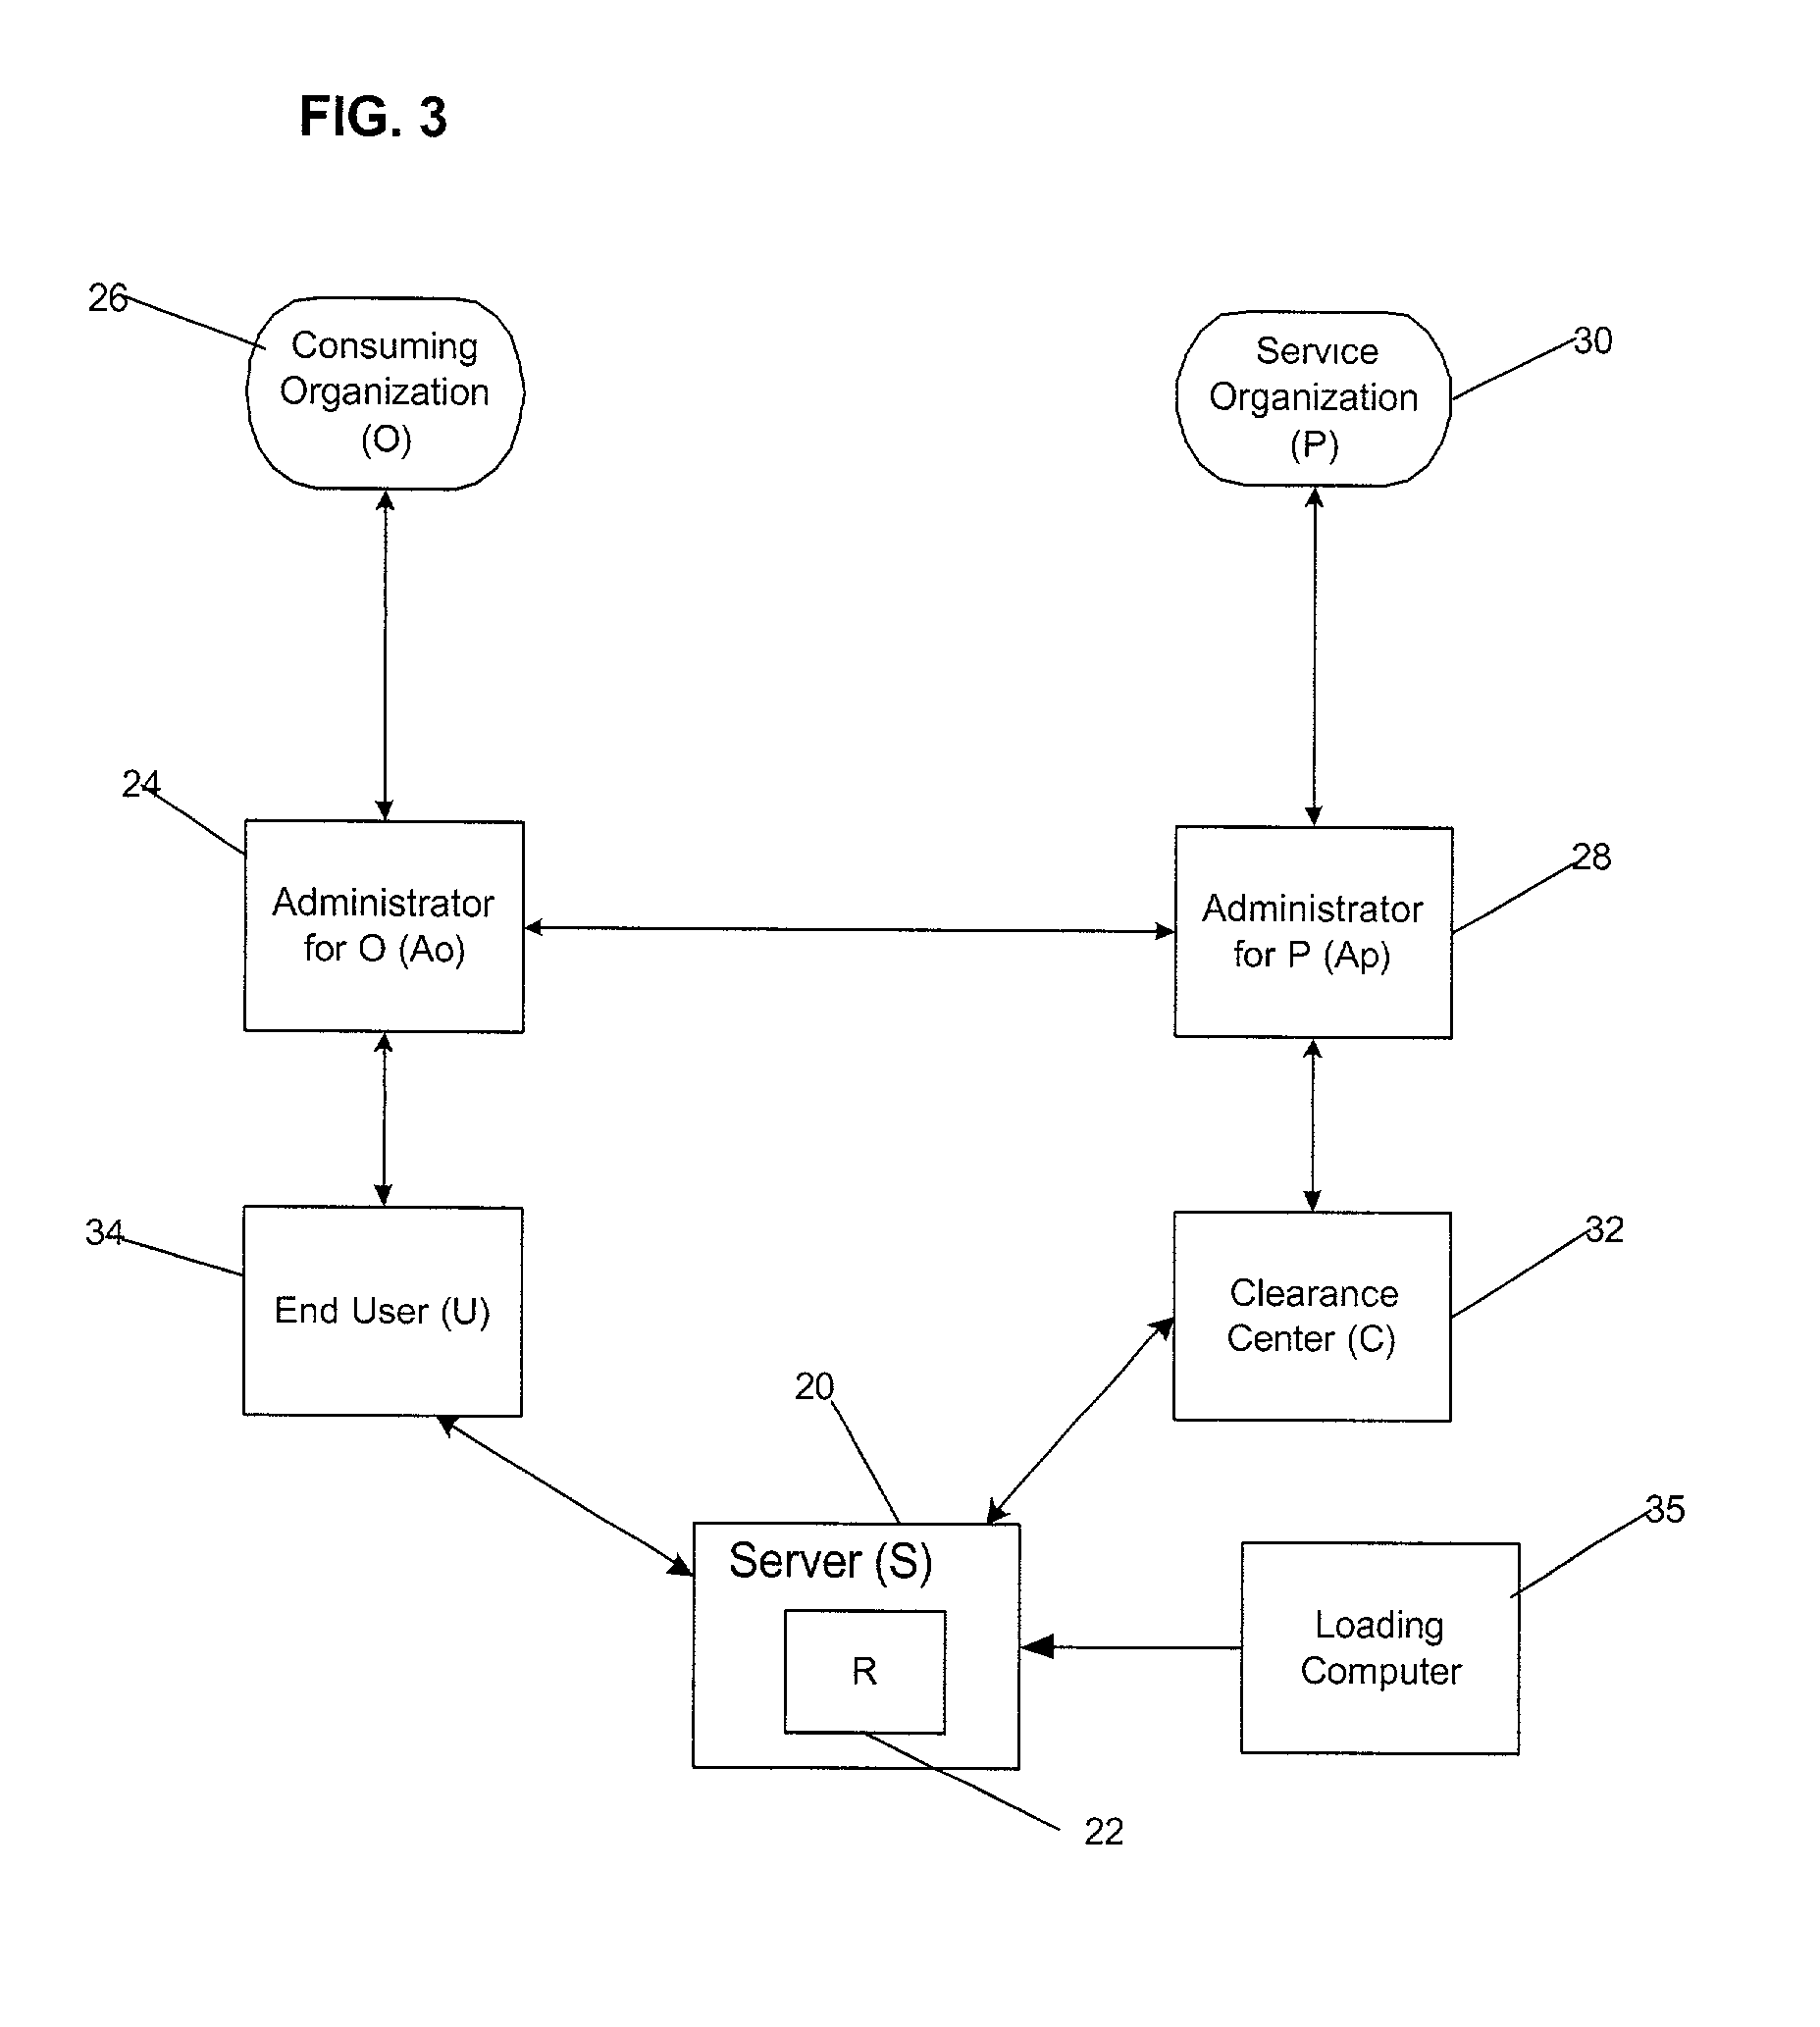 Umethod, system and program for managing relationships among entities to exchange encryption keys for use in providing access and authorization to resources